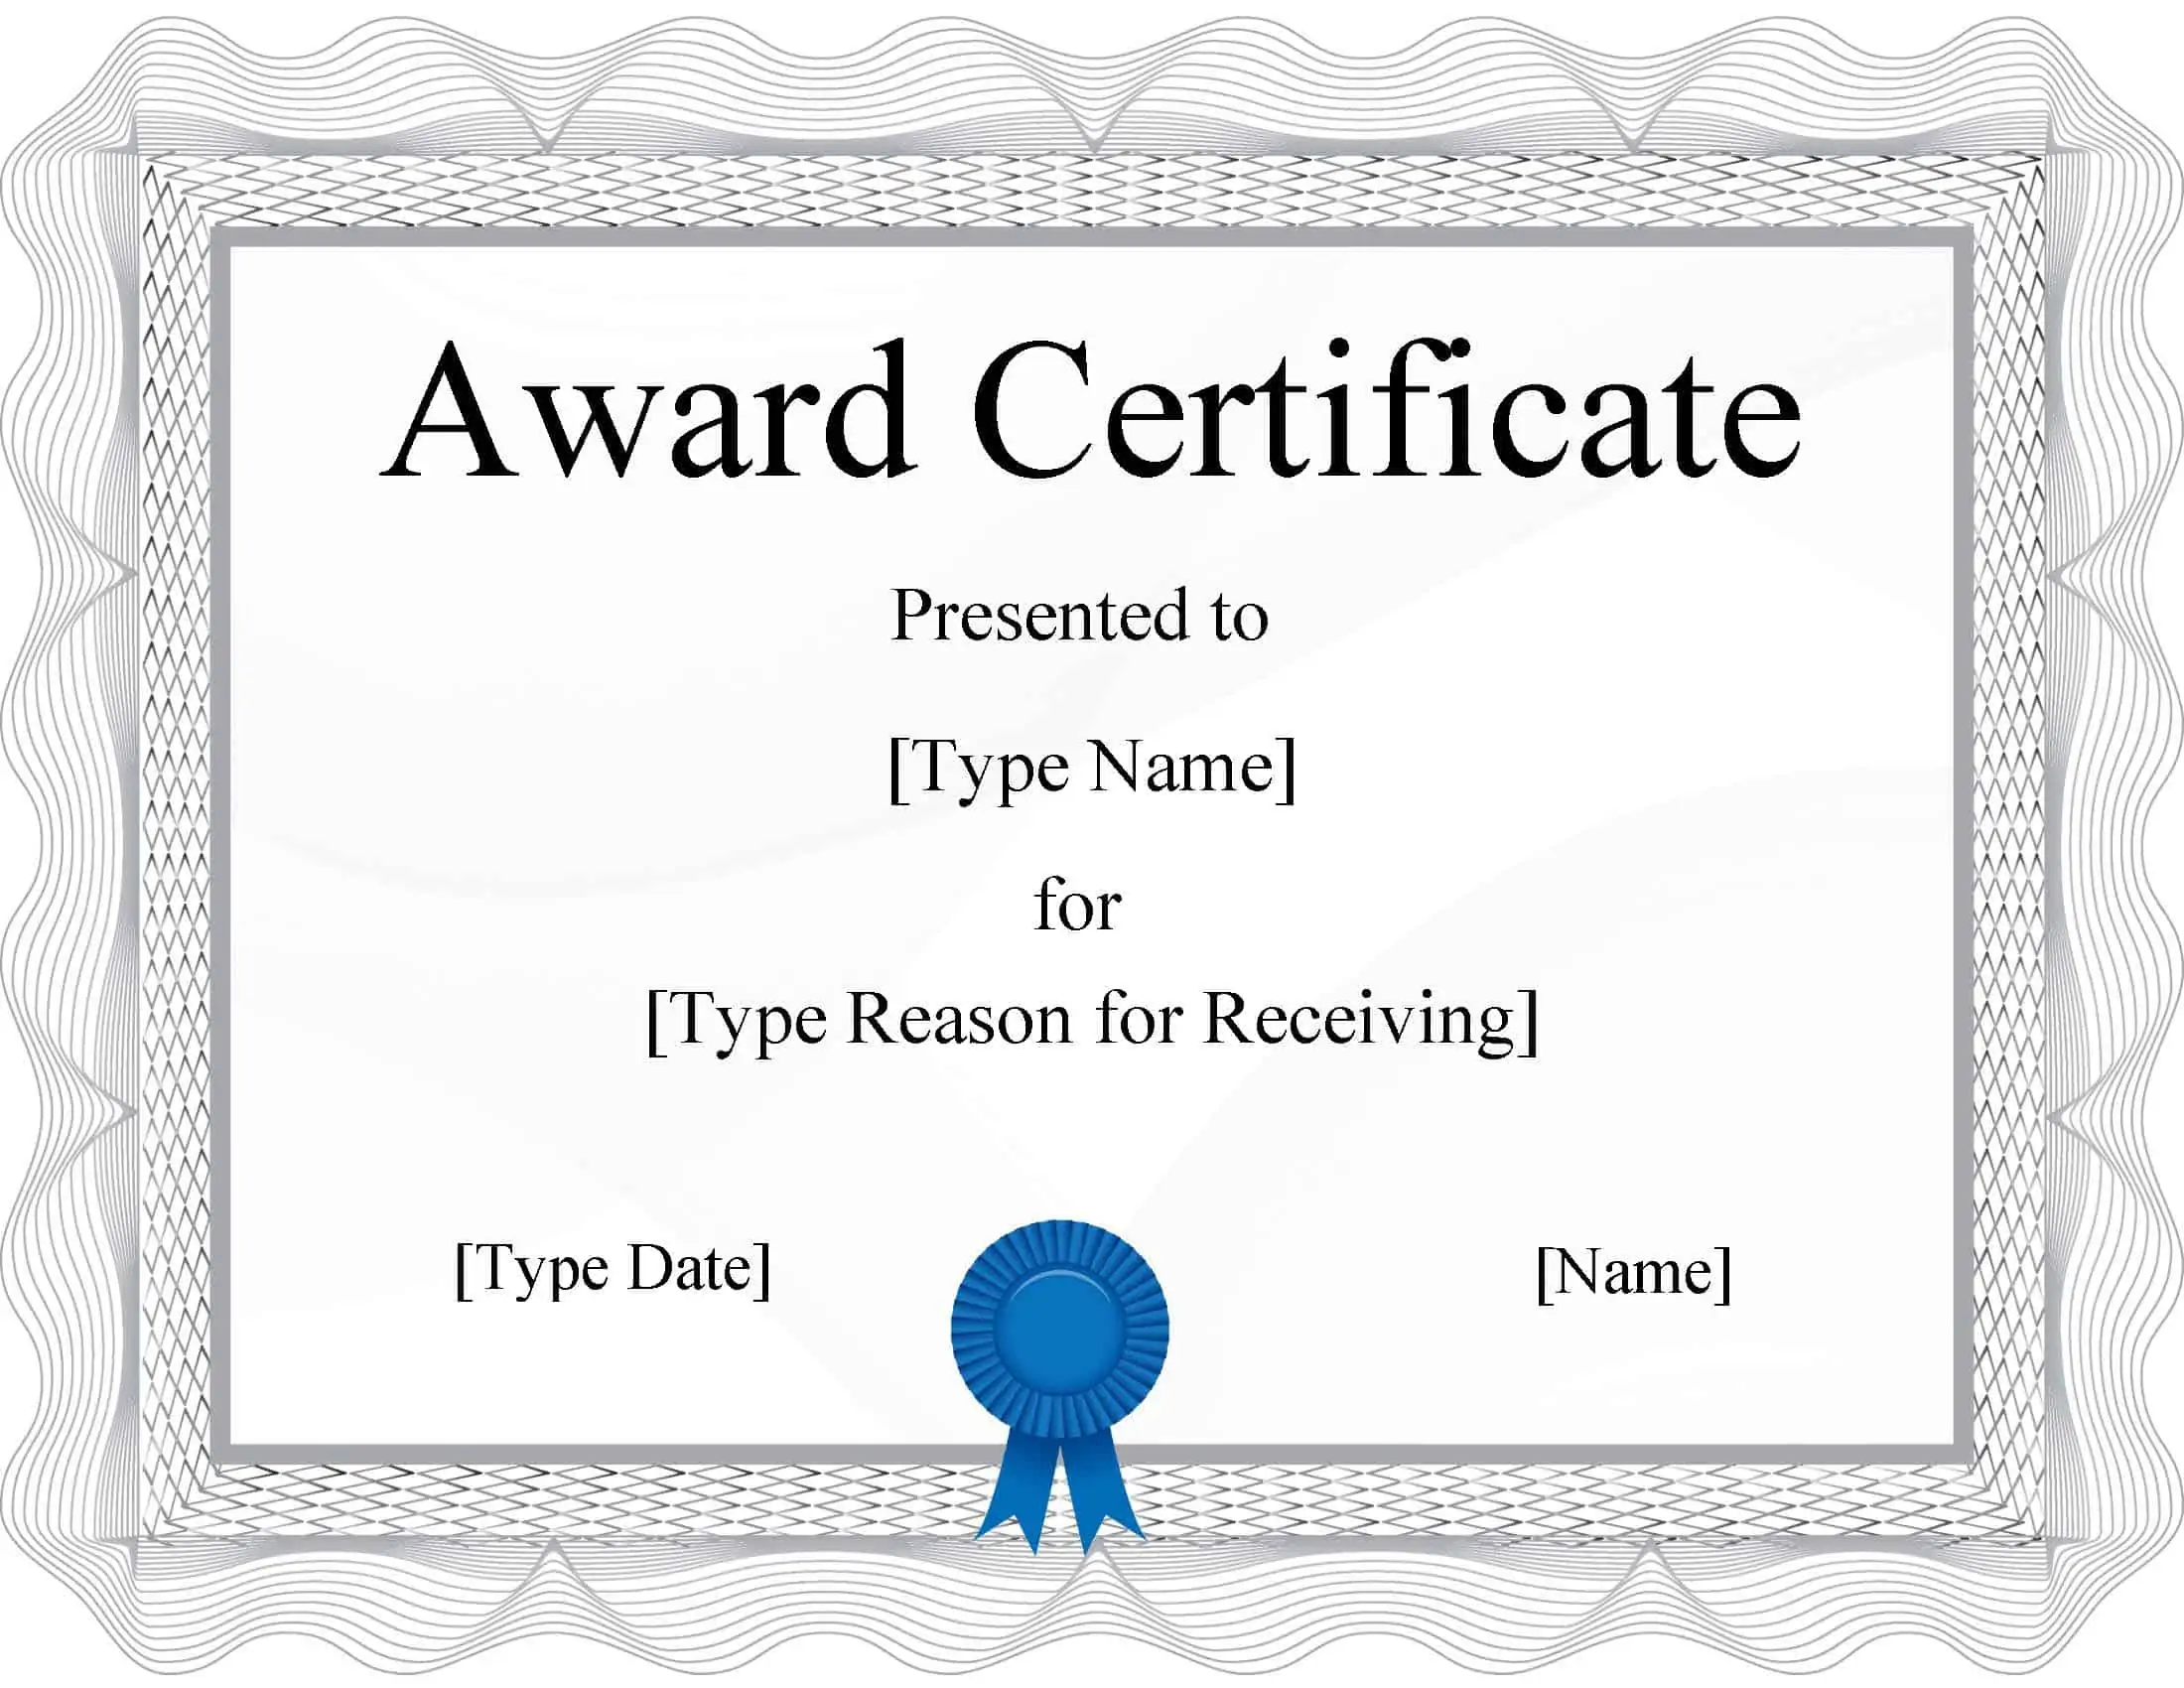 FREE Certificate Template Word  Instant Download Throughout Award Certificate Templates Word 2007